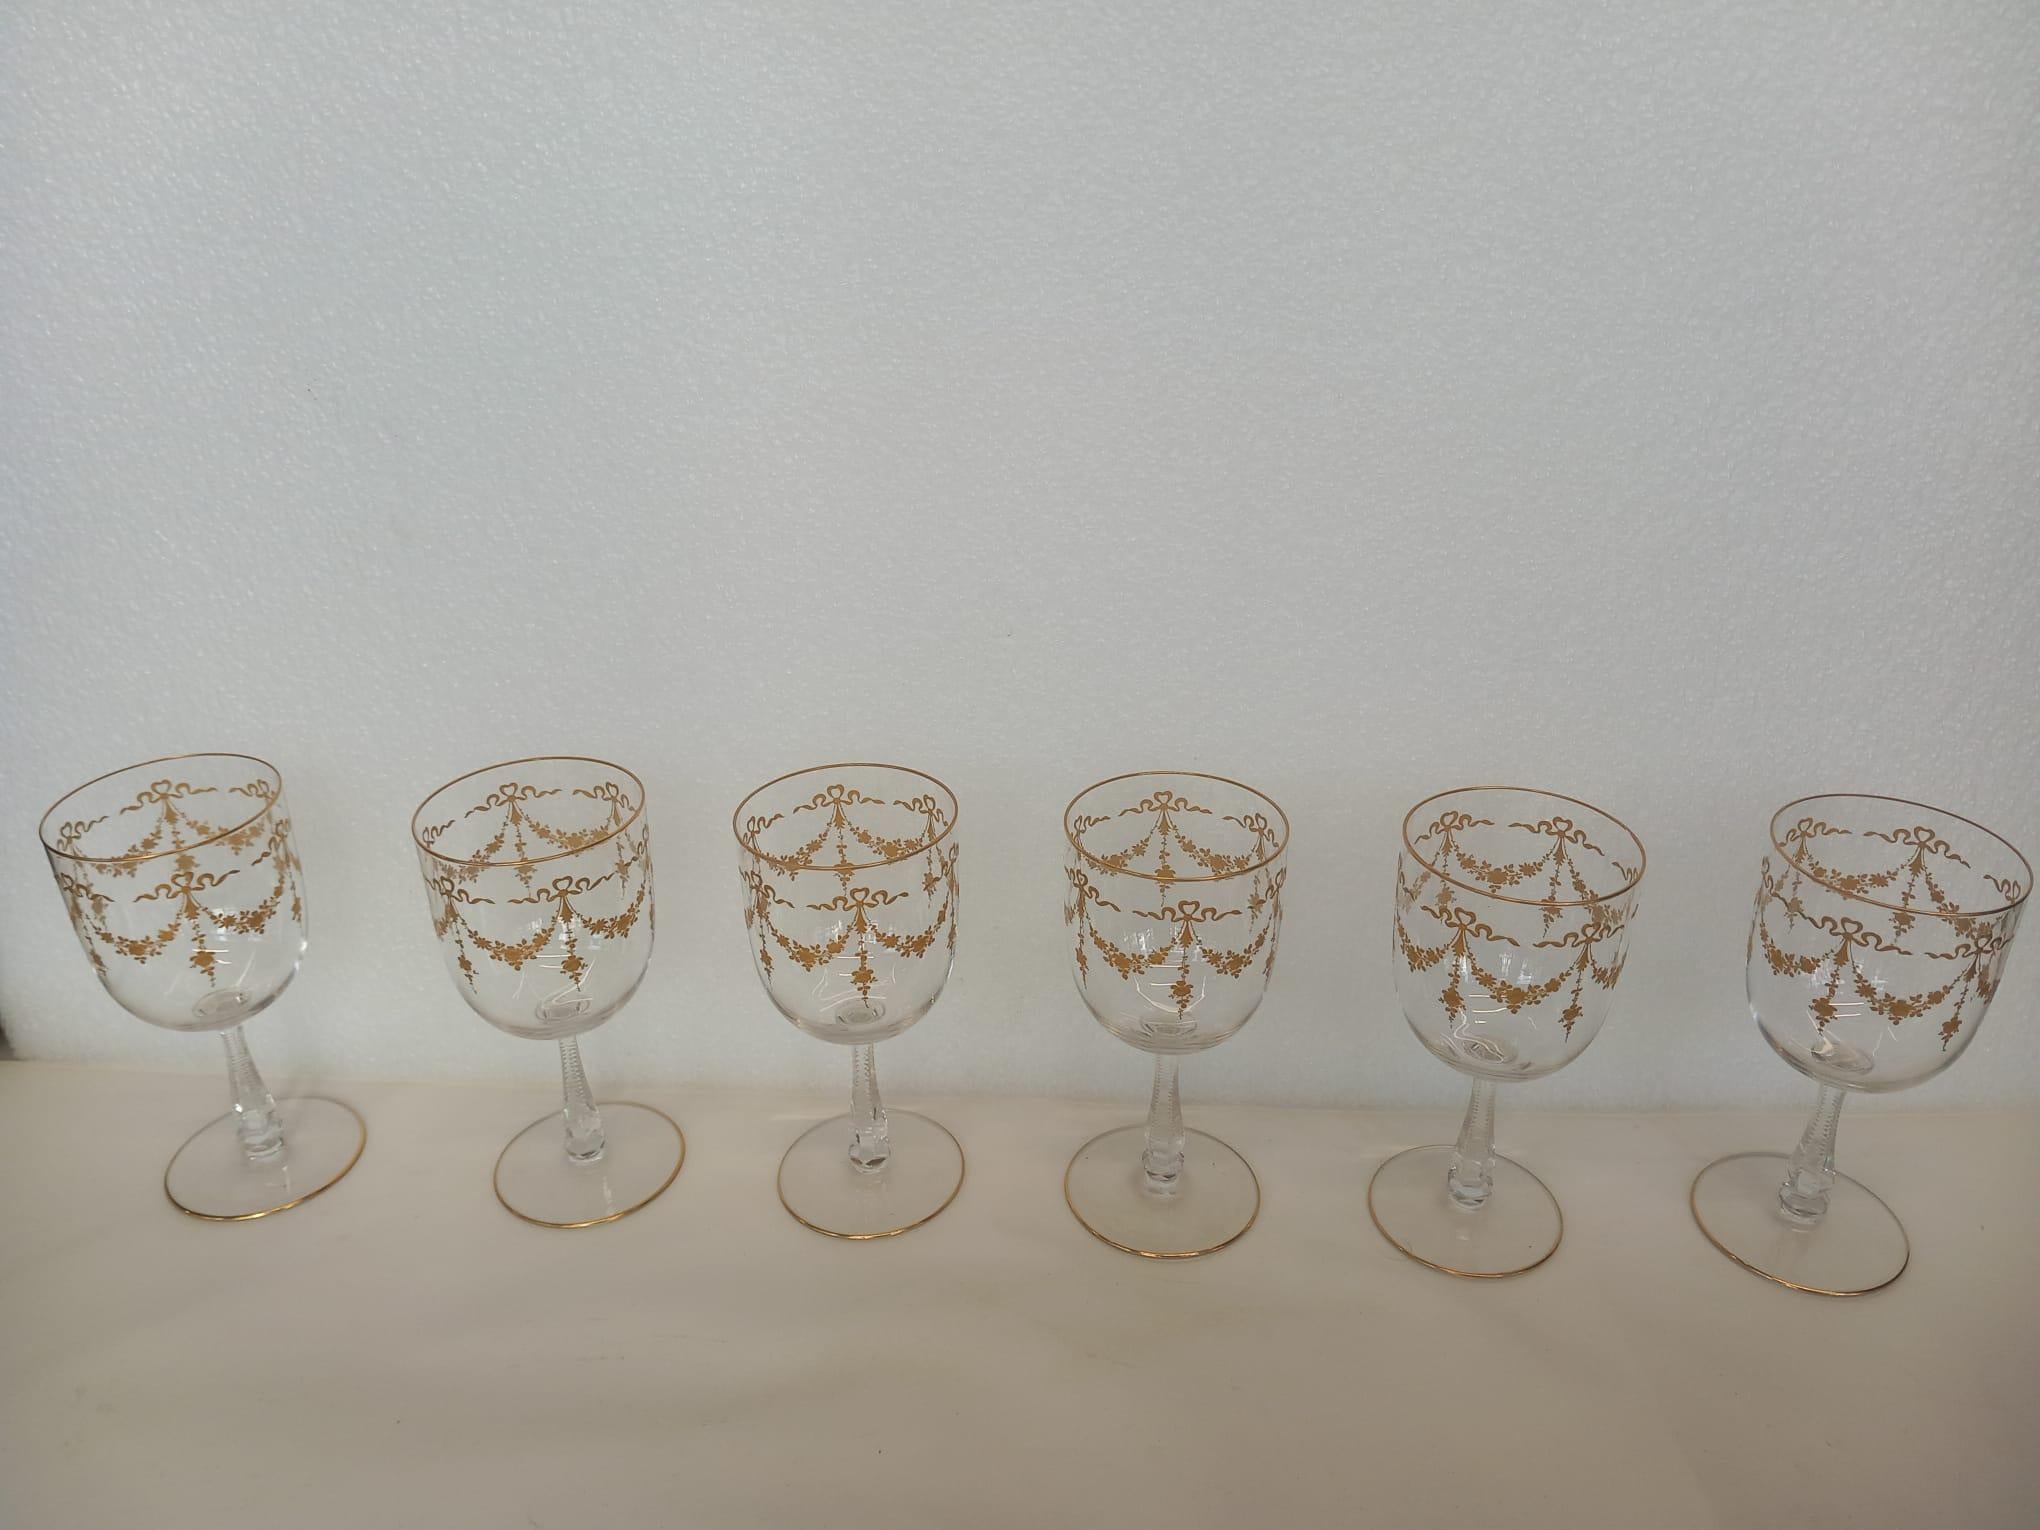 A fantastic set of Saint Louis crystal glasses dating from the late nineteenth century. Each piece is hand decorated with gold swags of flowers and bows, the stems have a slight cut design to make the holding of the glass comfortable. 
The beautiful